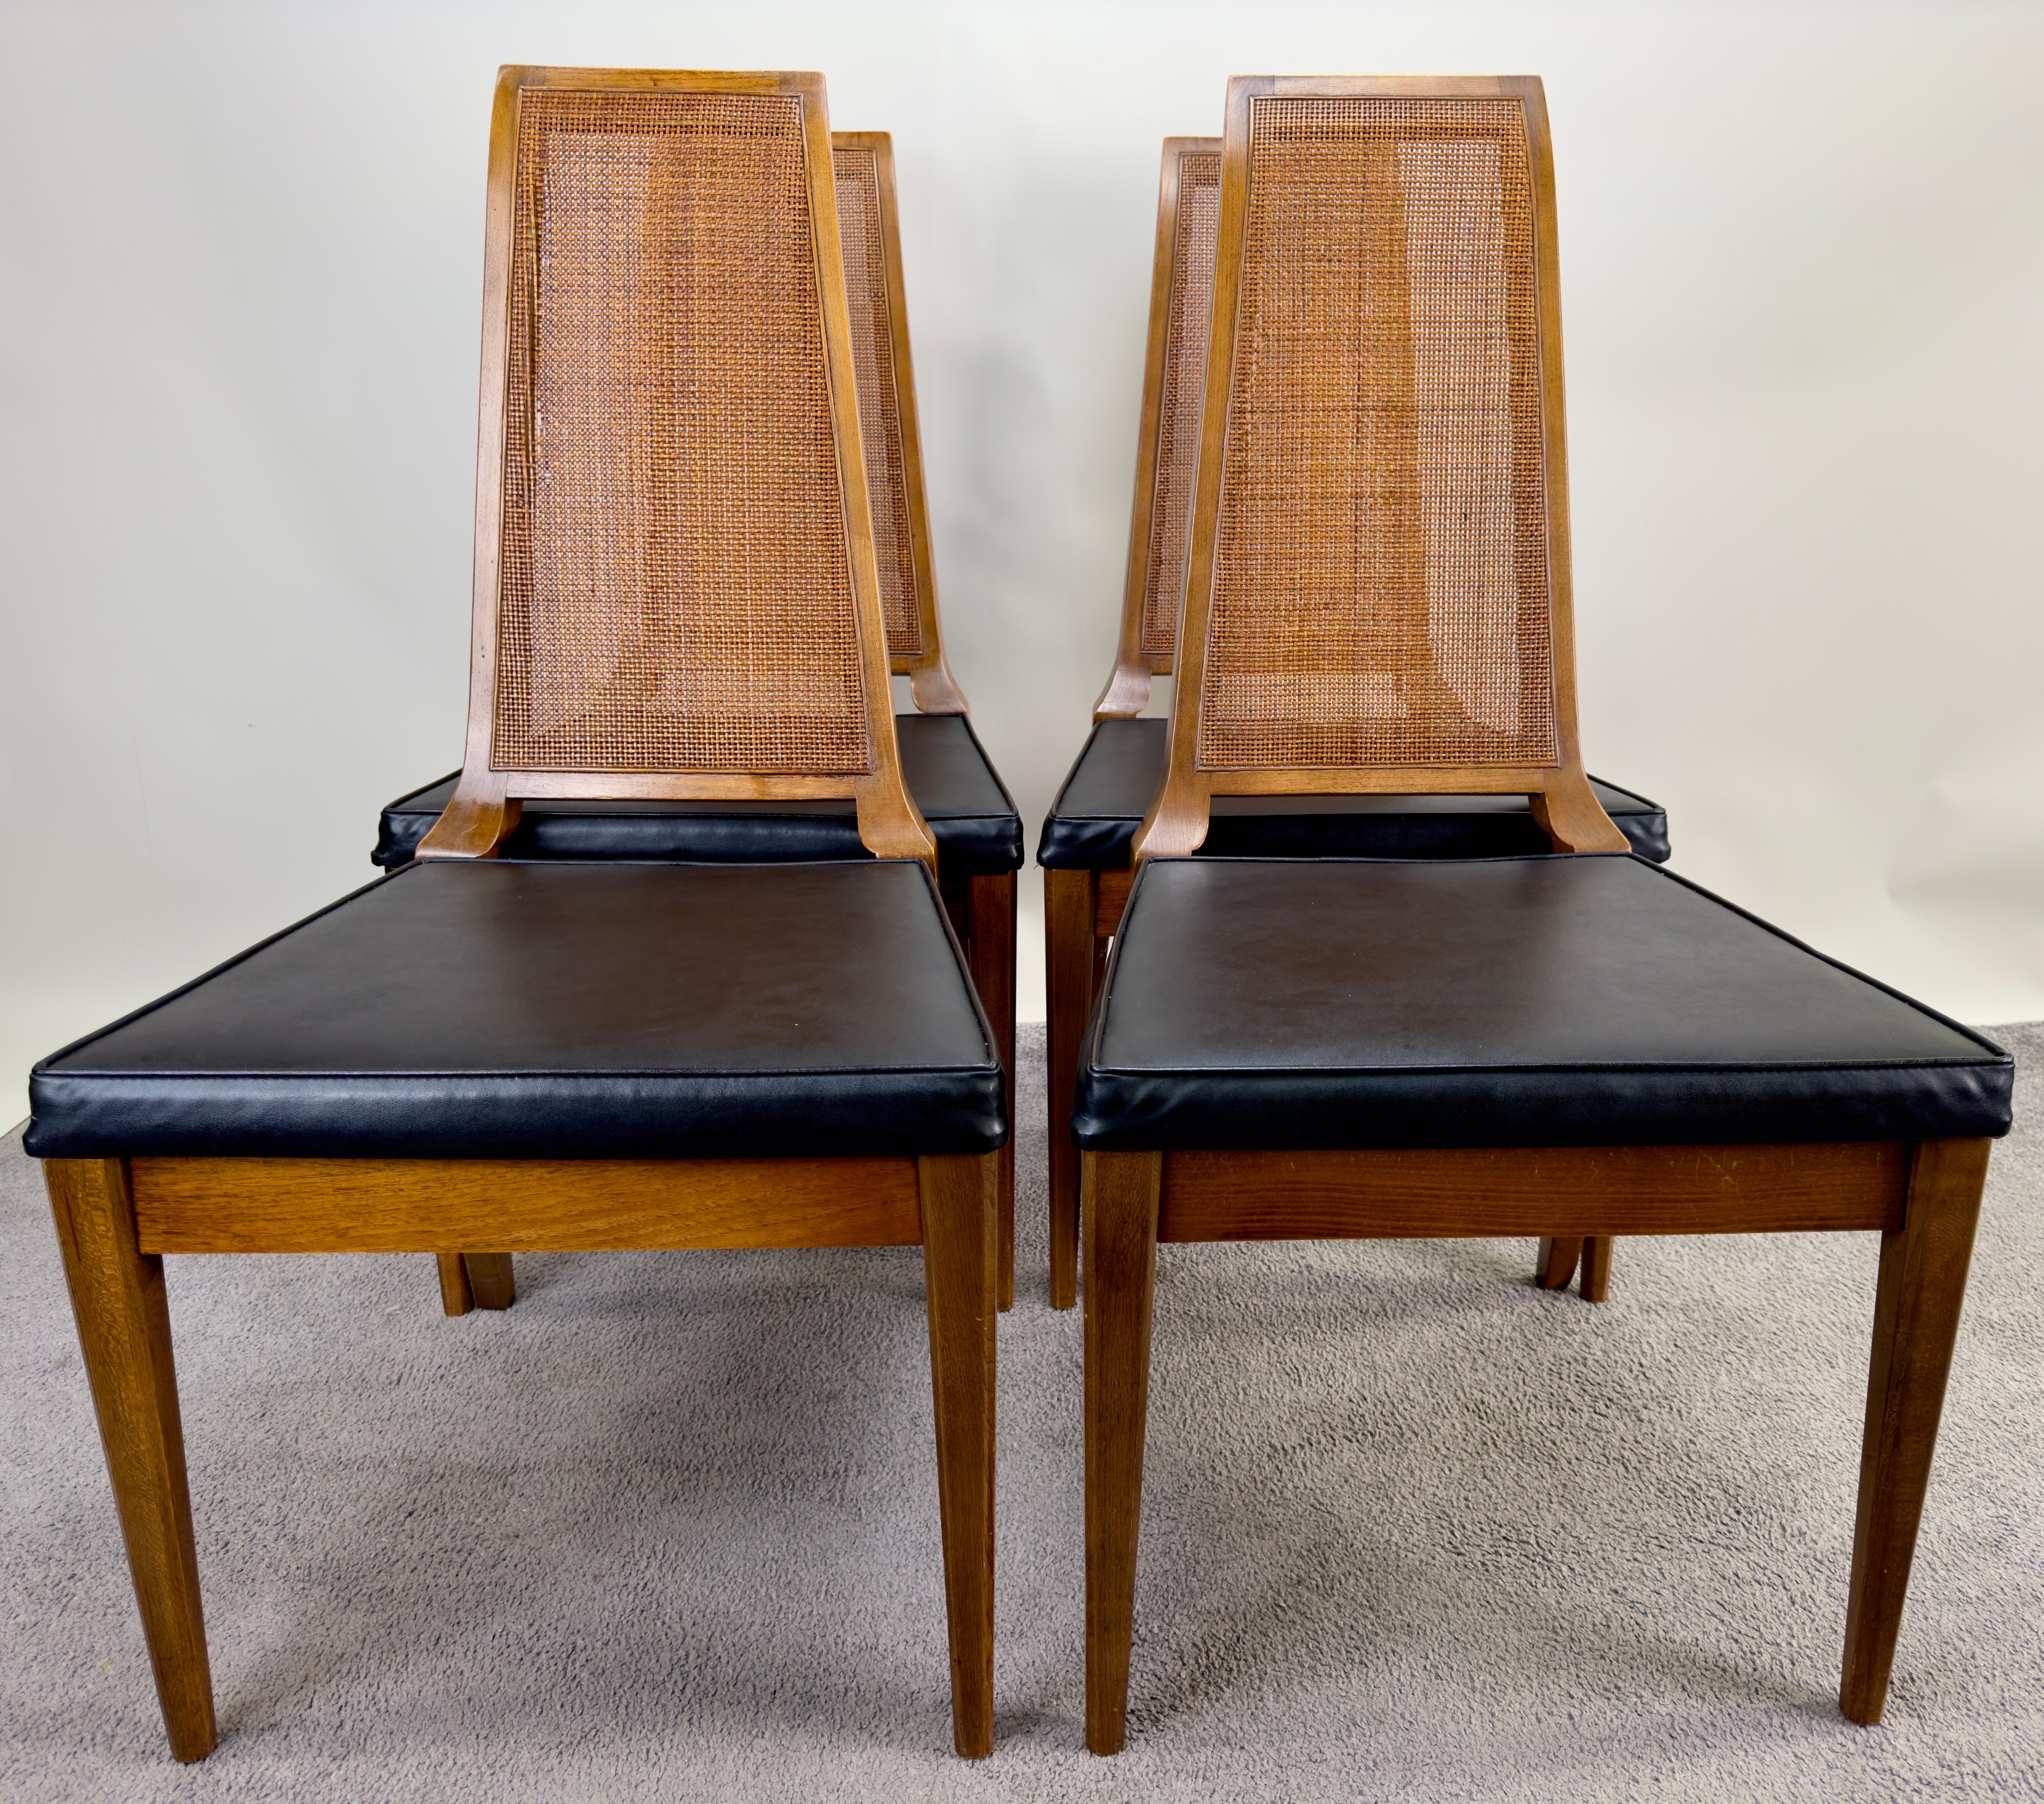 Mid Century Modern Walnut & Cane Dining Chair by American of Martinsville, 6 pcs In Good Condition For Sale In Plainview, NY